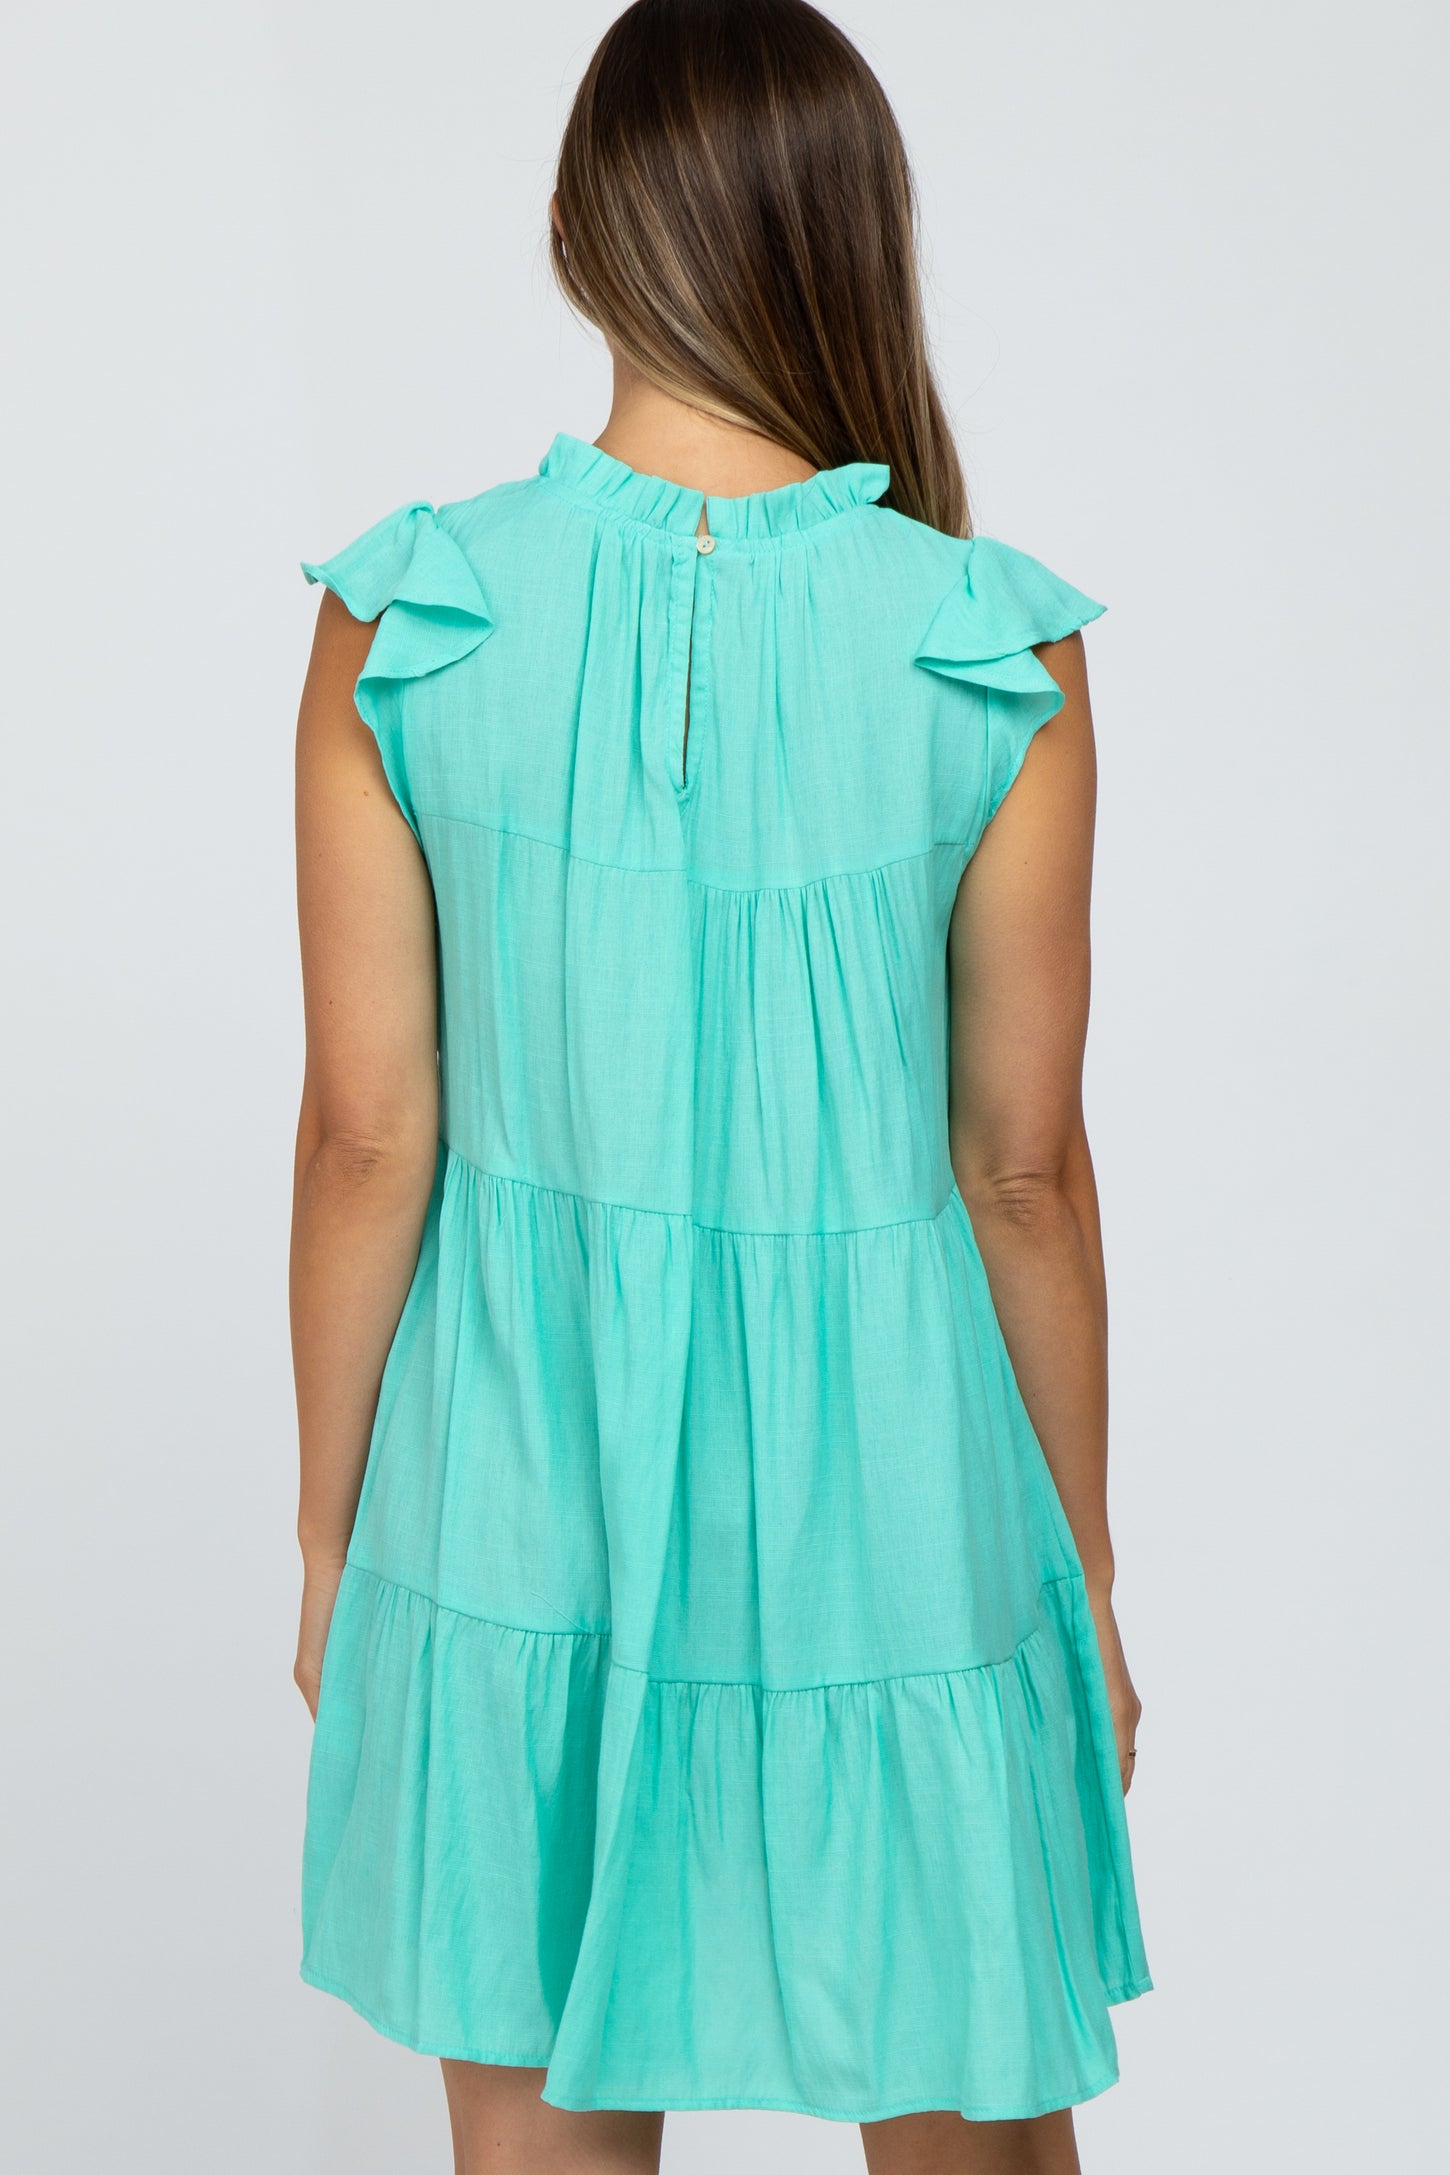 Mint Green Ruffle Accent Tiered Maternity Dress